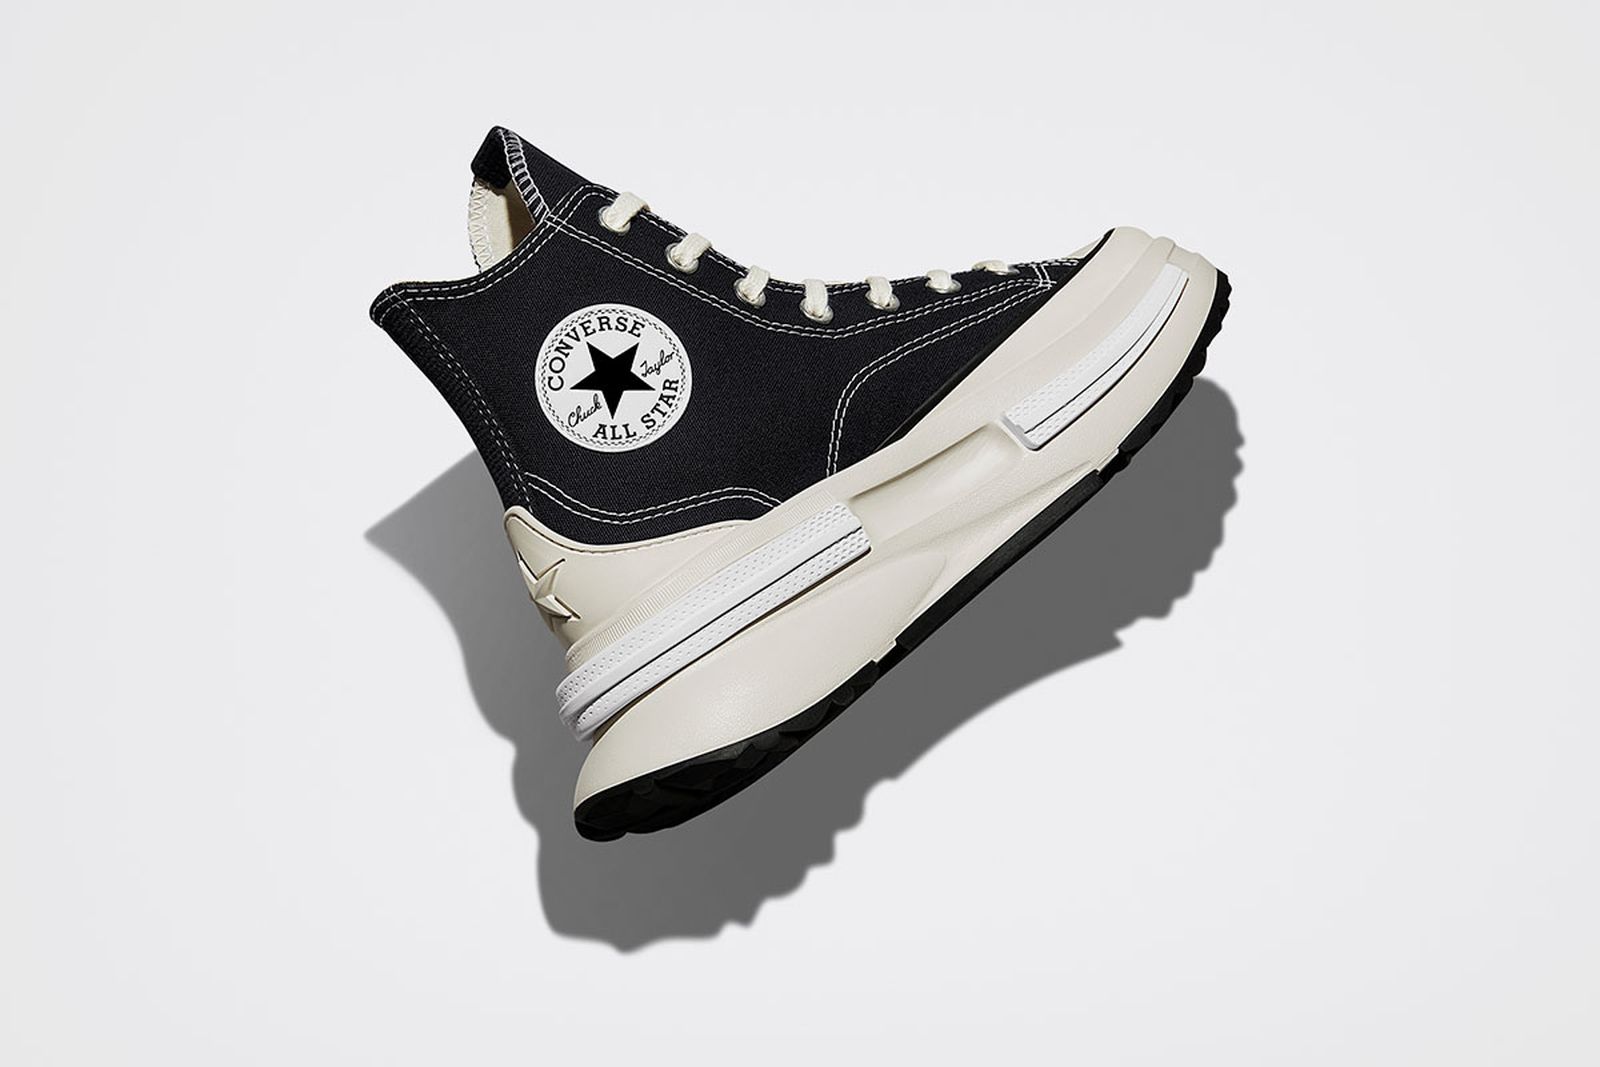 Converse Launches Three New Chuck Styles for FW22